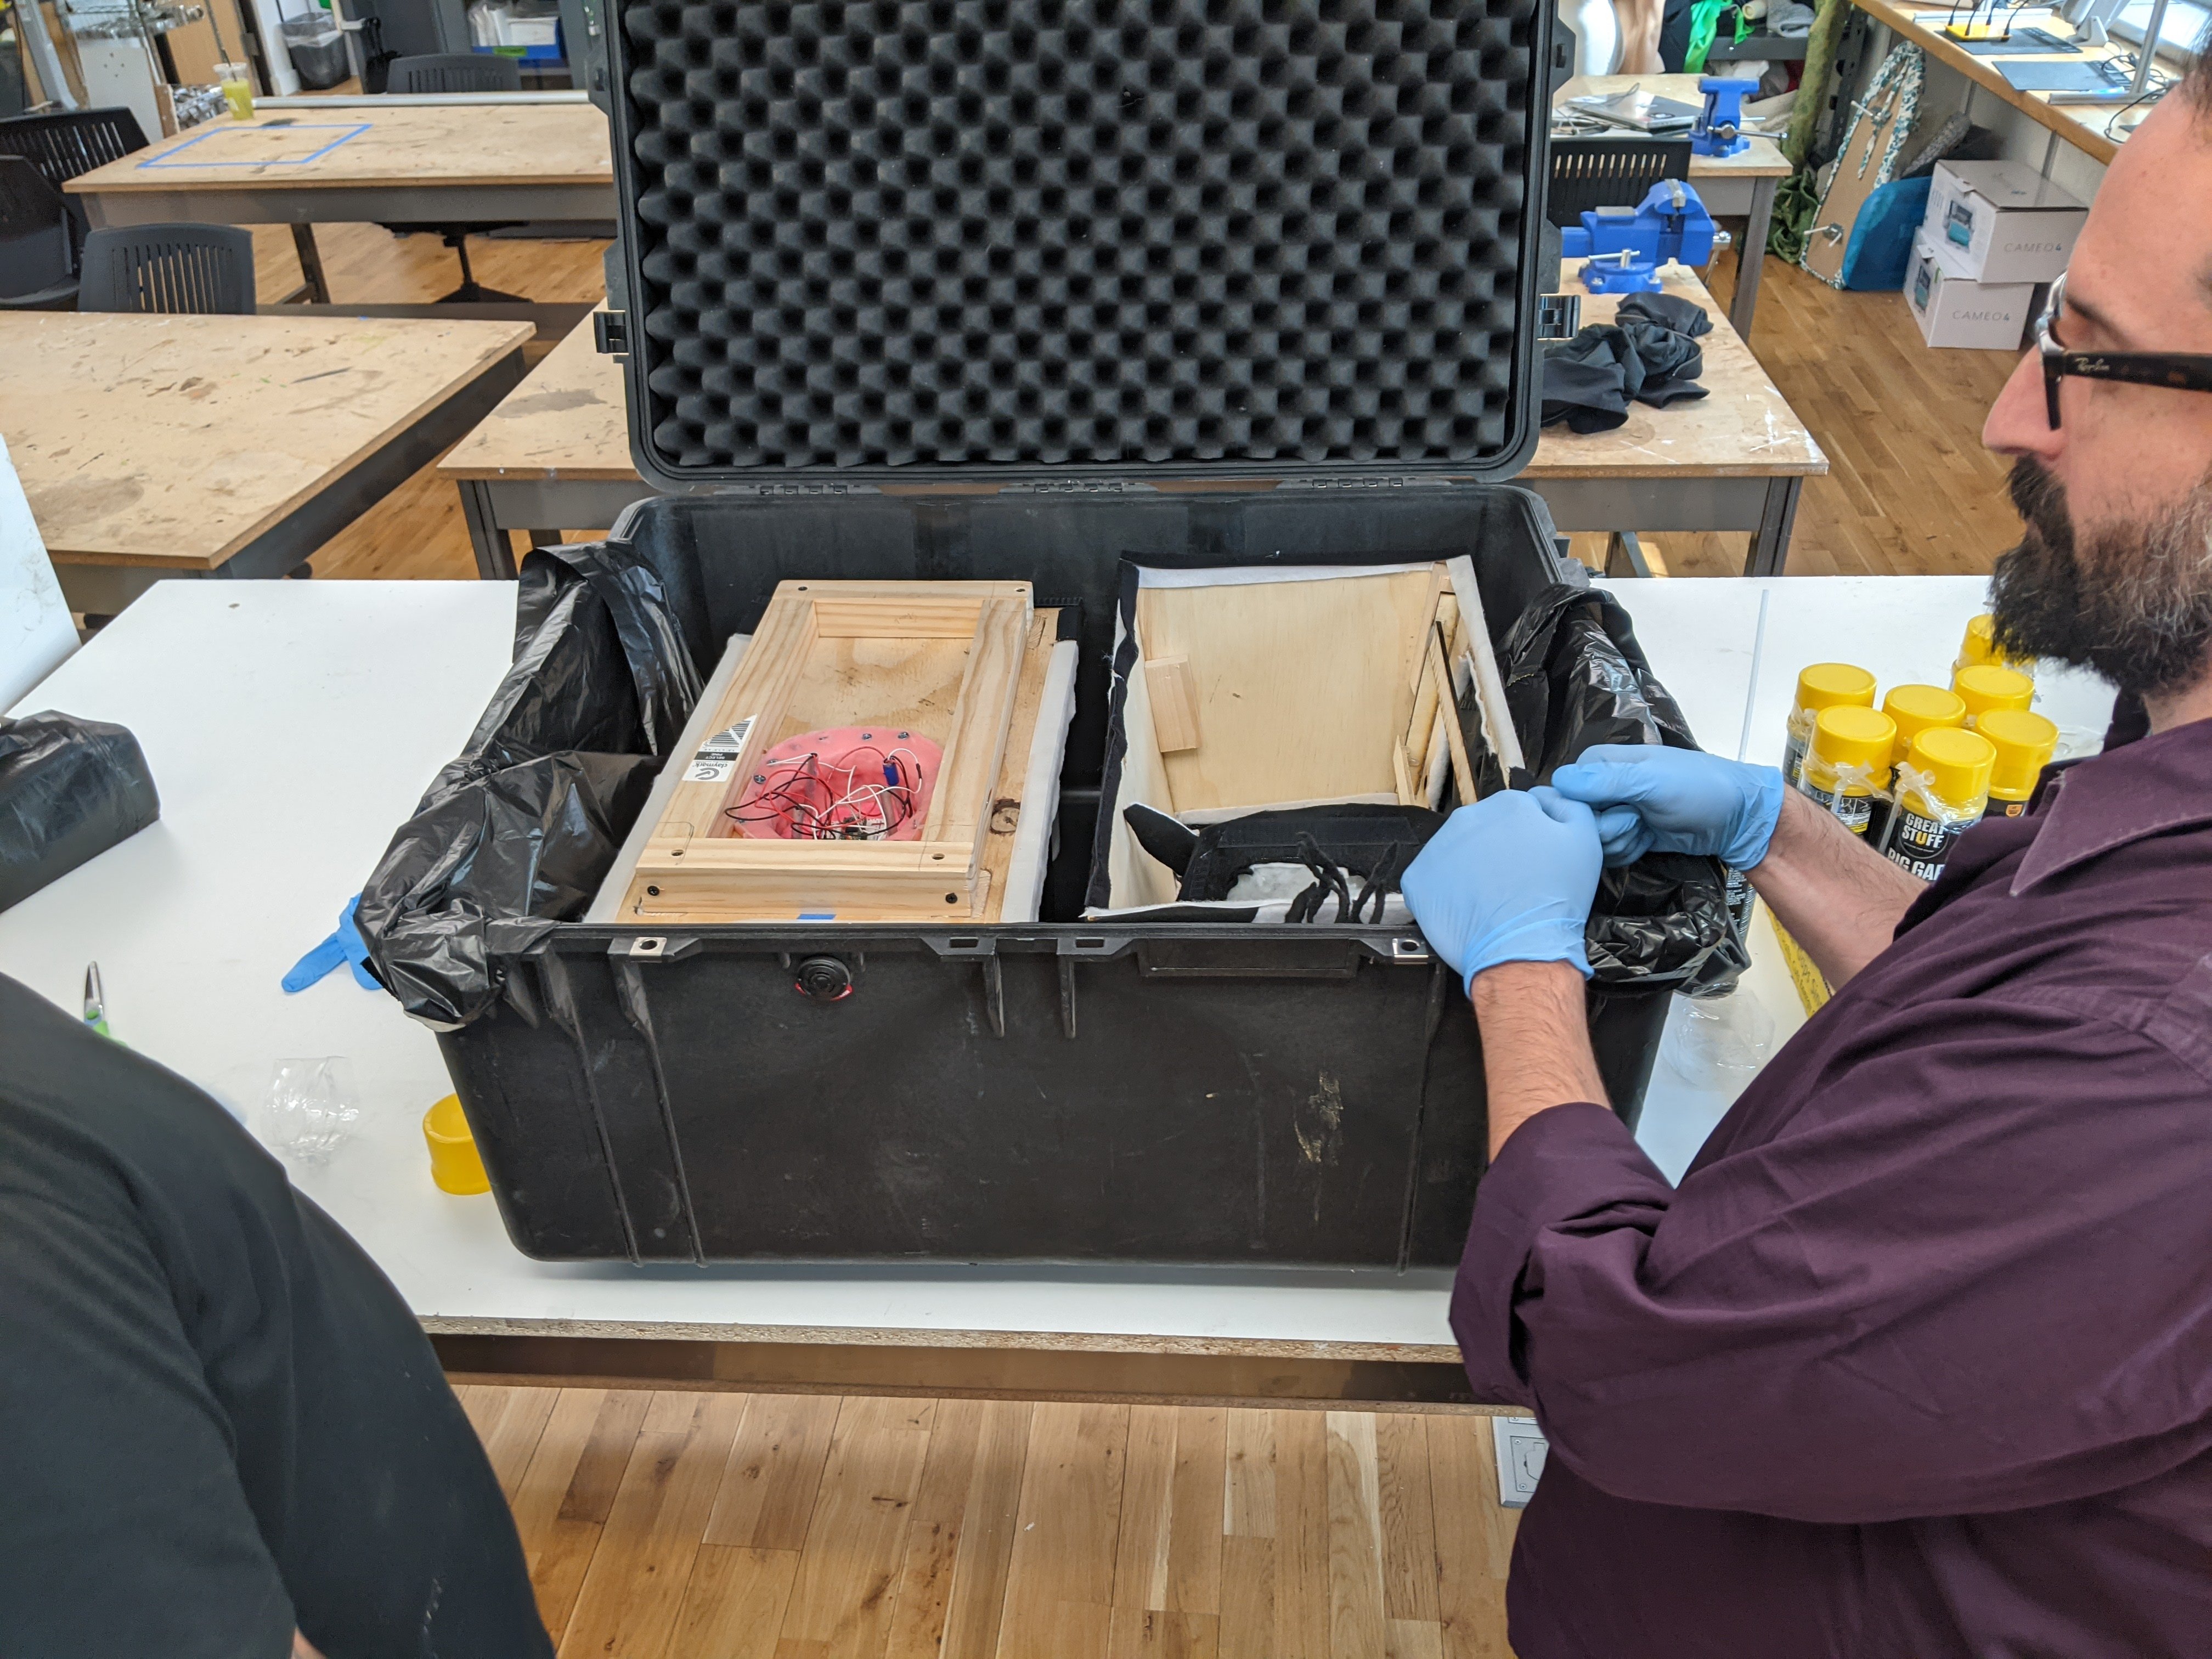 Photograph of stuffing the cow in a Pelican case for shipping